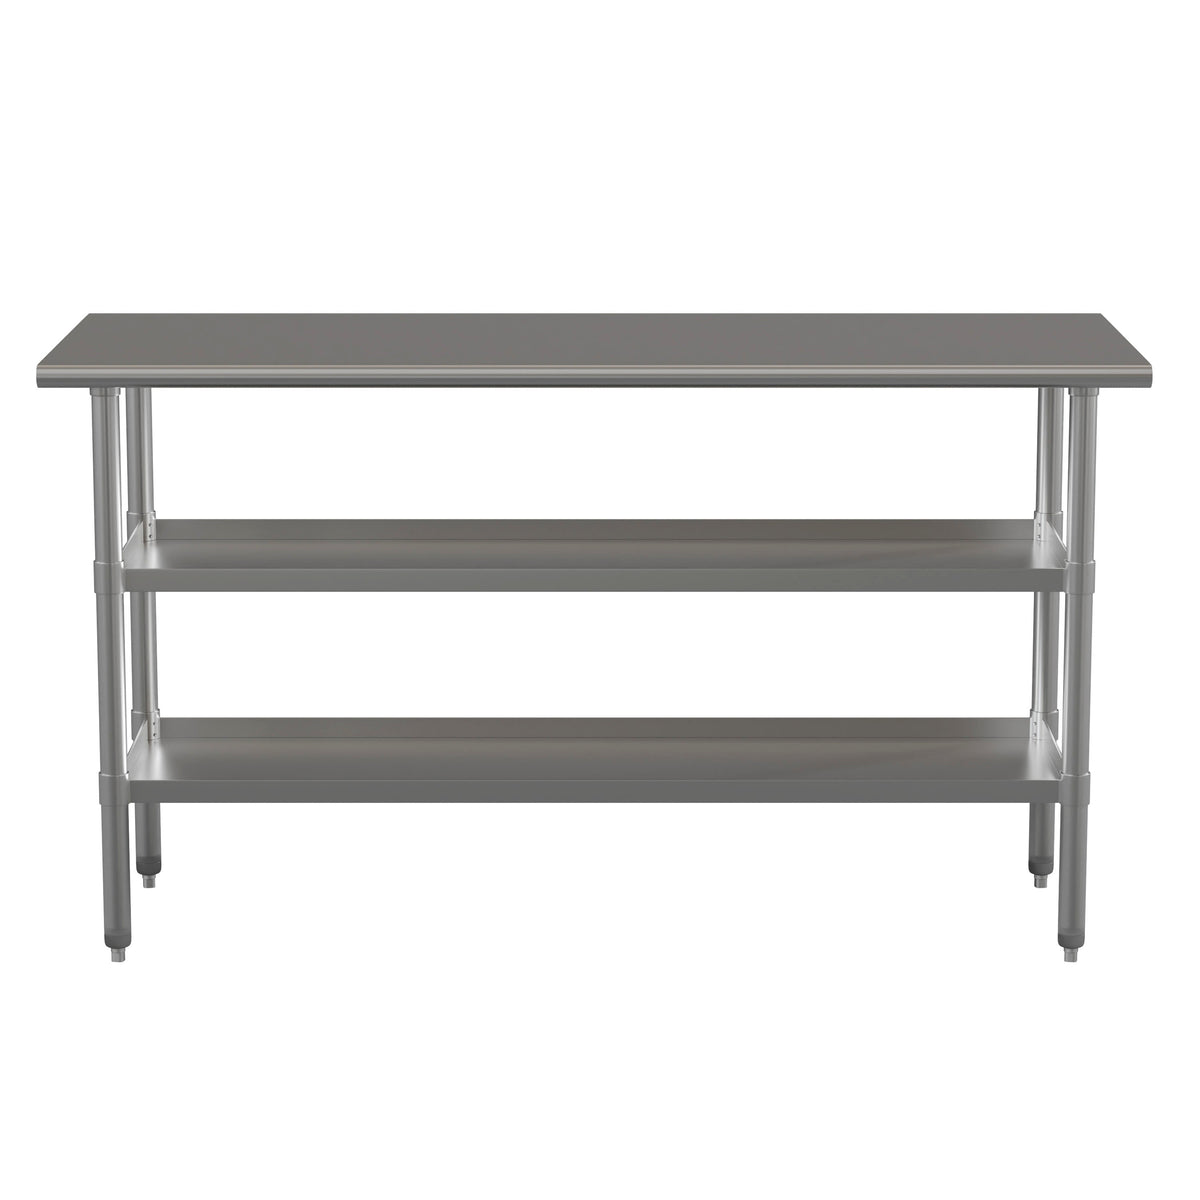 60"W x 24"D |#| 60"W x 24"D NSF Stainless Steel 18 Gauge Work Table with 2 Undershelves